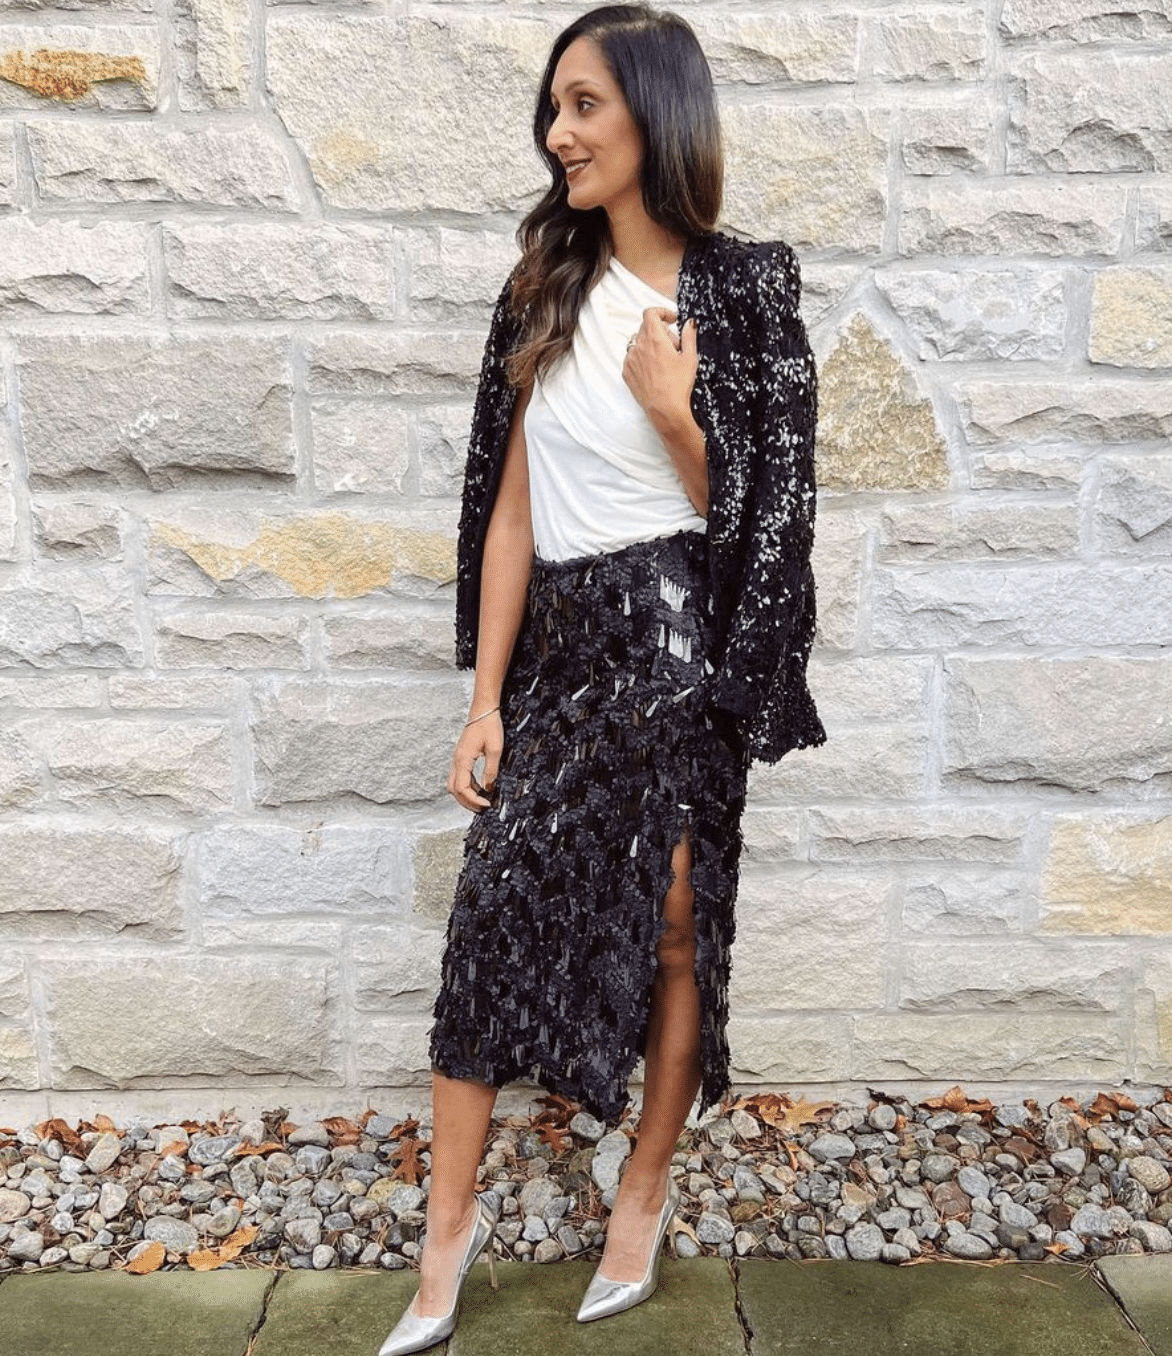 Sequin skirt and blazer outfit